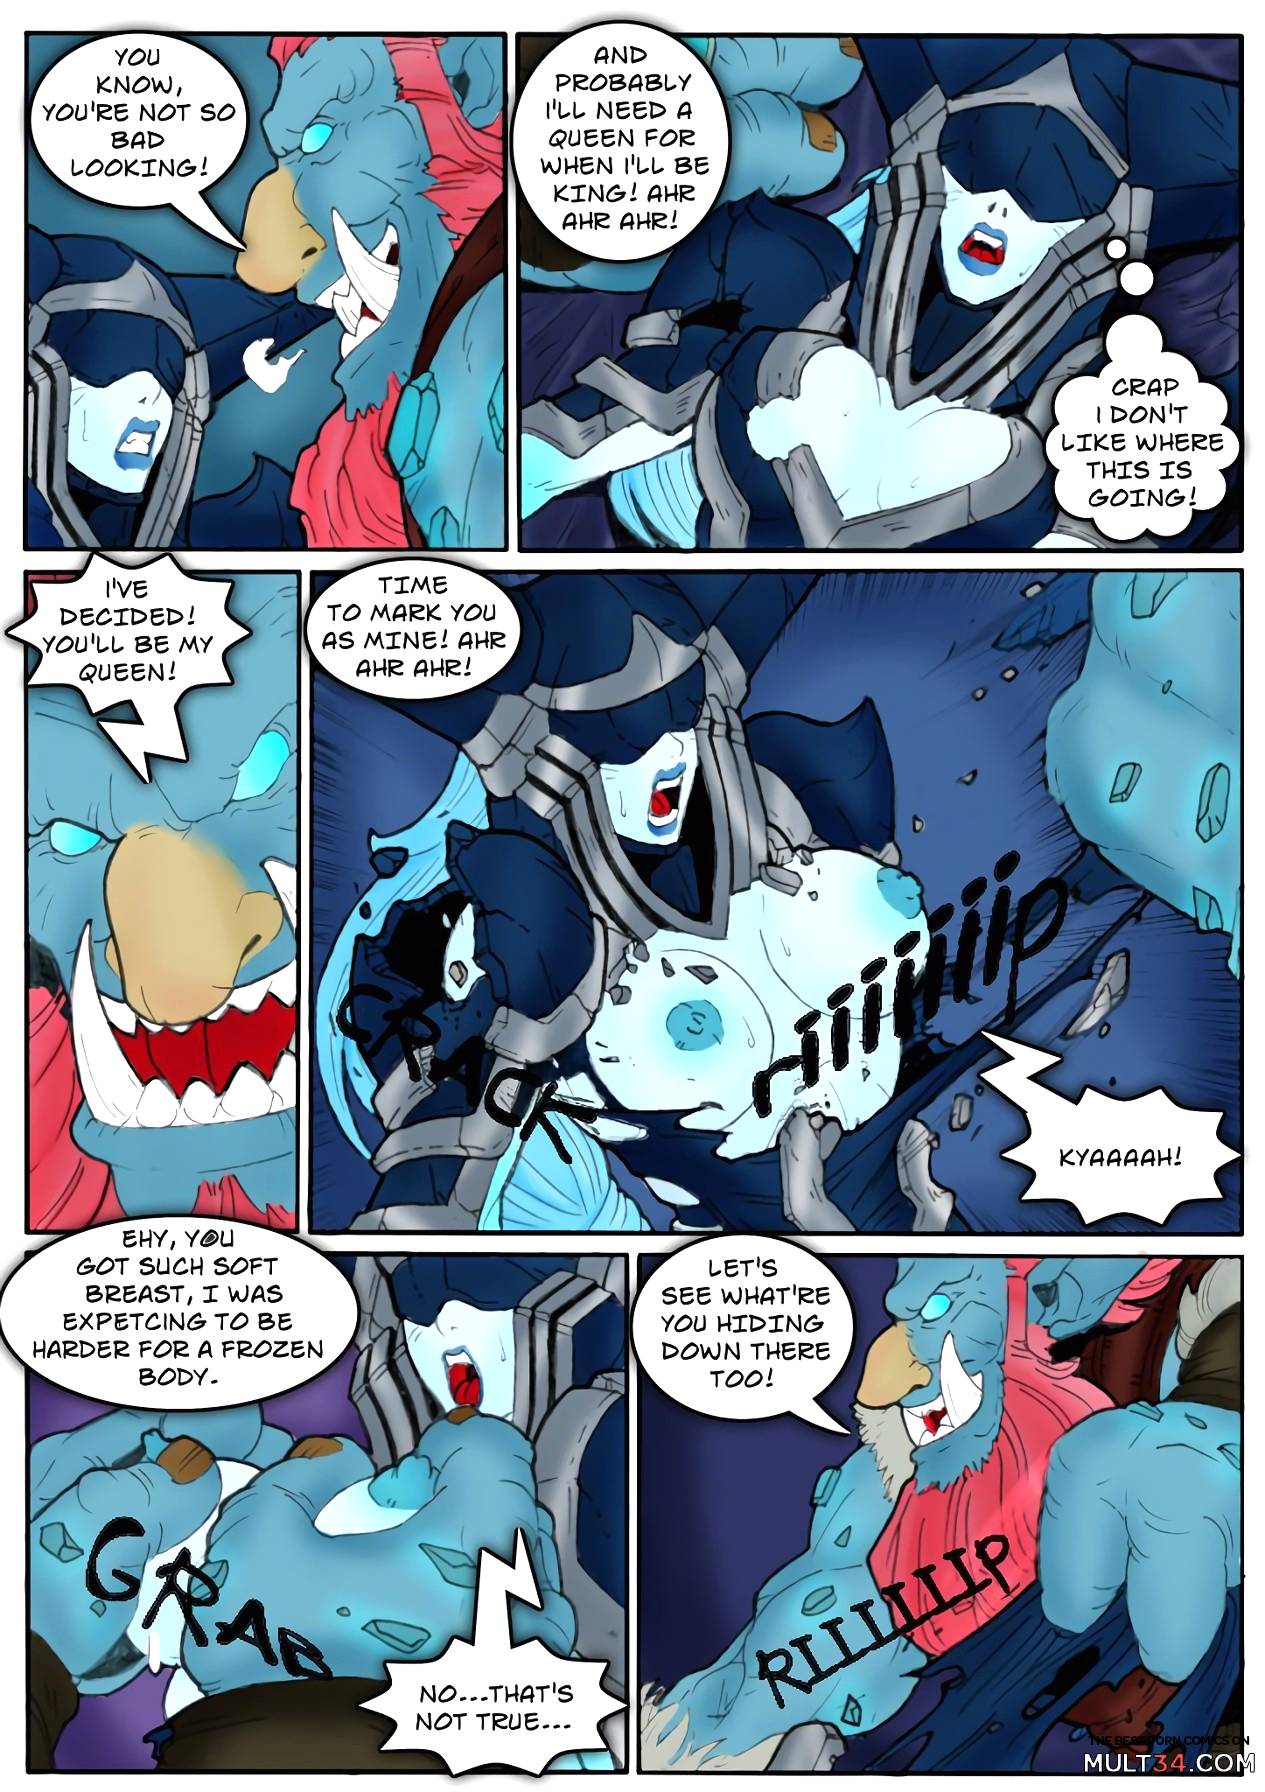 Tales of the Troll King ch. 1 - 3 ] [Colorized] page 6